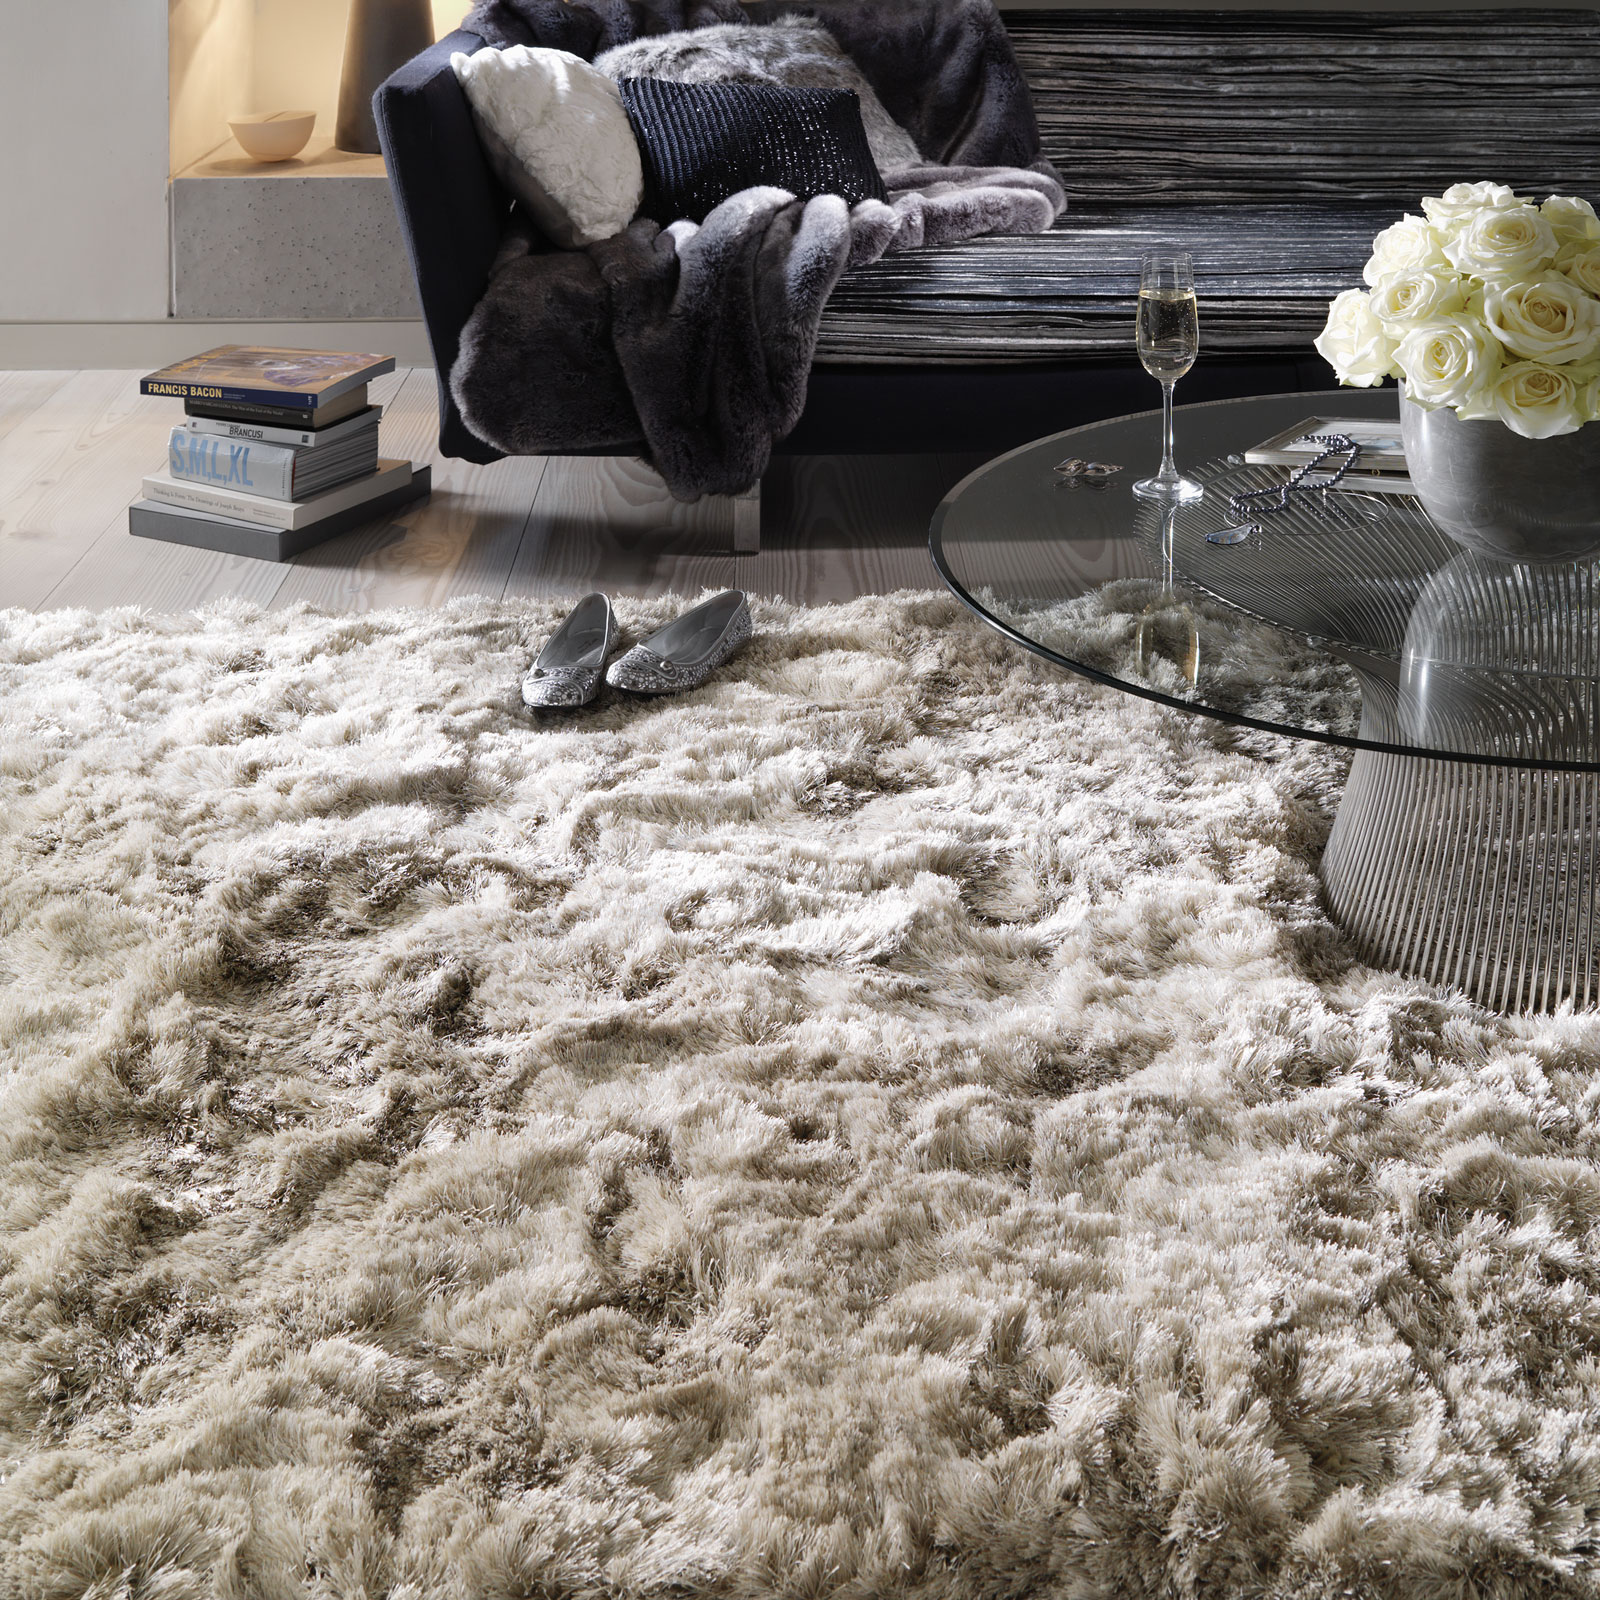 Plush Shaggy rugs in sand from the rug seller